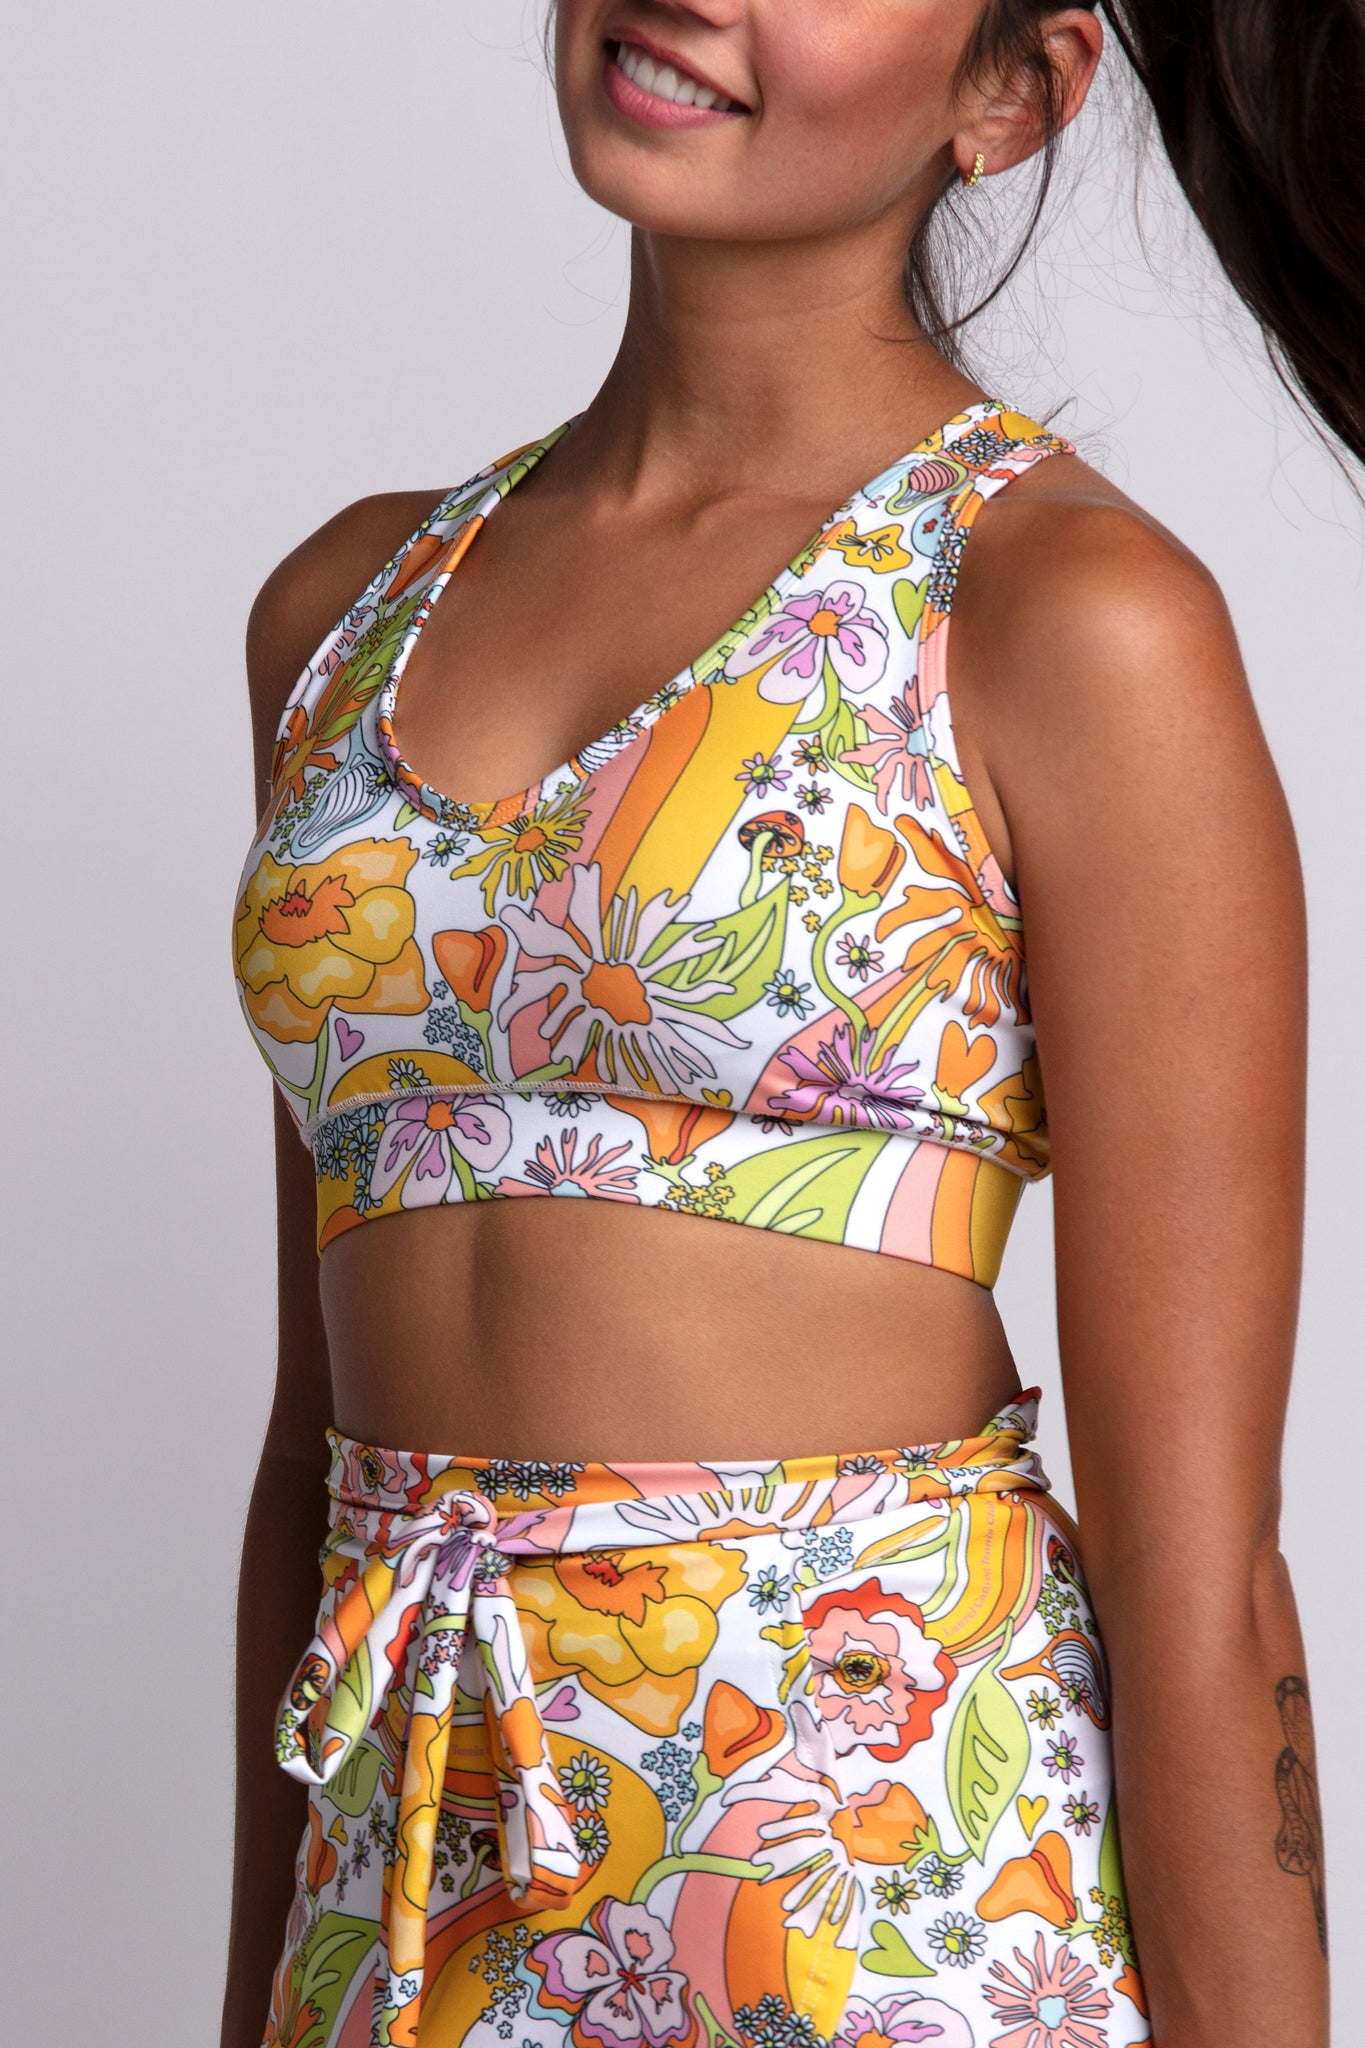 Melty Racquet Recycled Sports Bra – Laurel Canyon Tennis Club